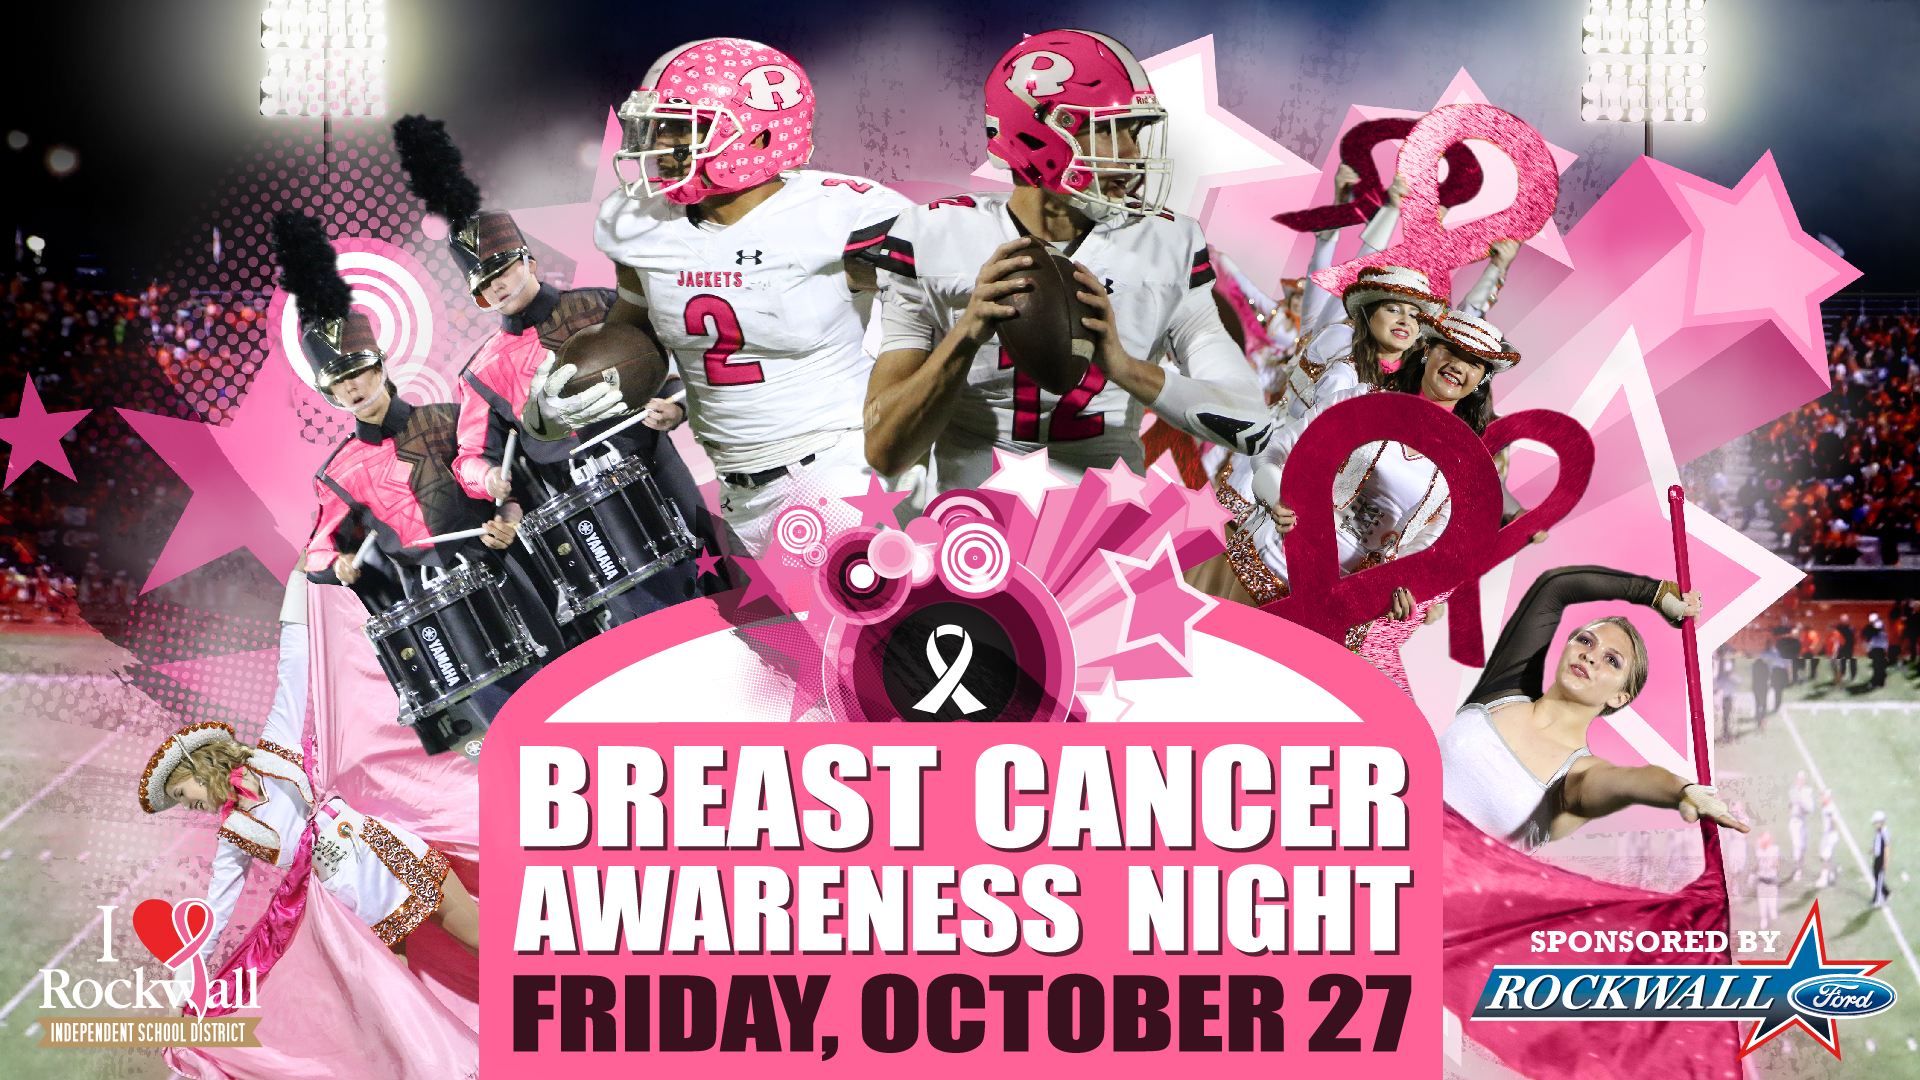 School district, Rockwall Ford to host Breast Cancer Awareness Night Oct. 27